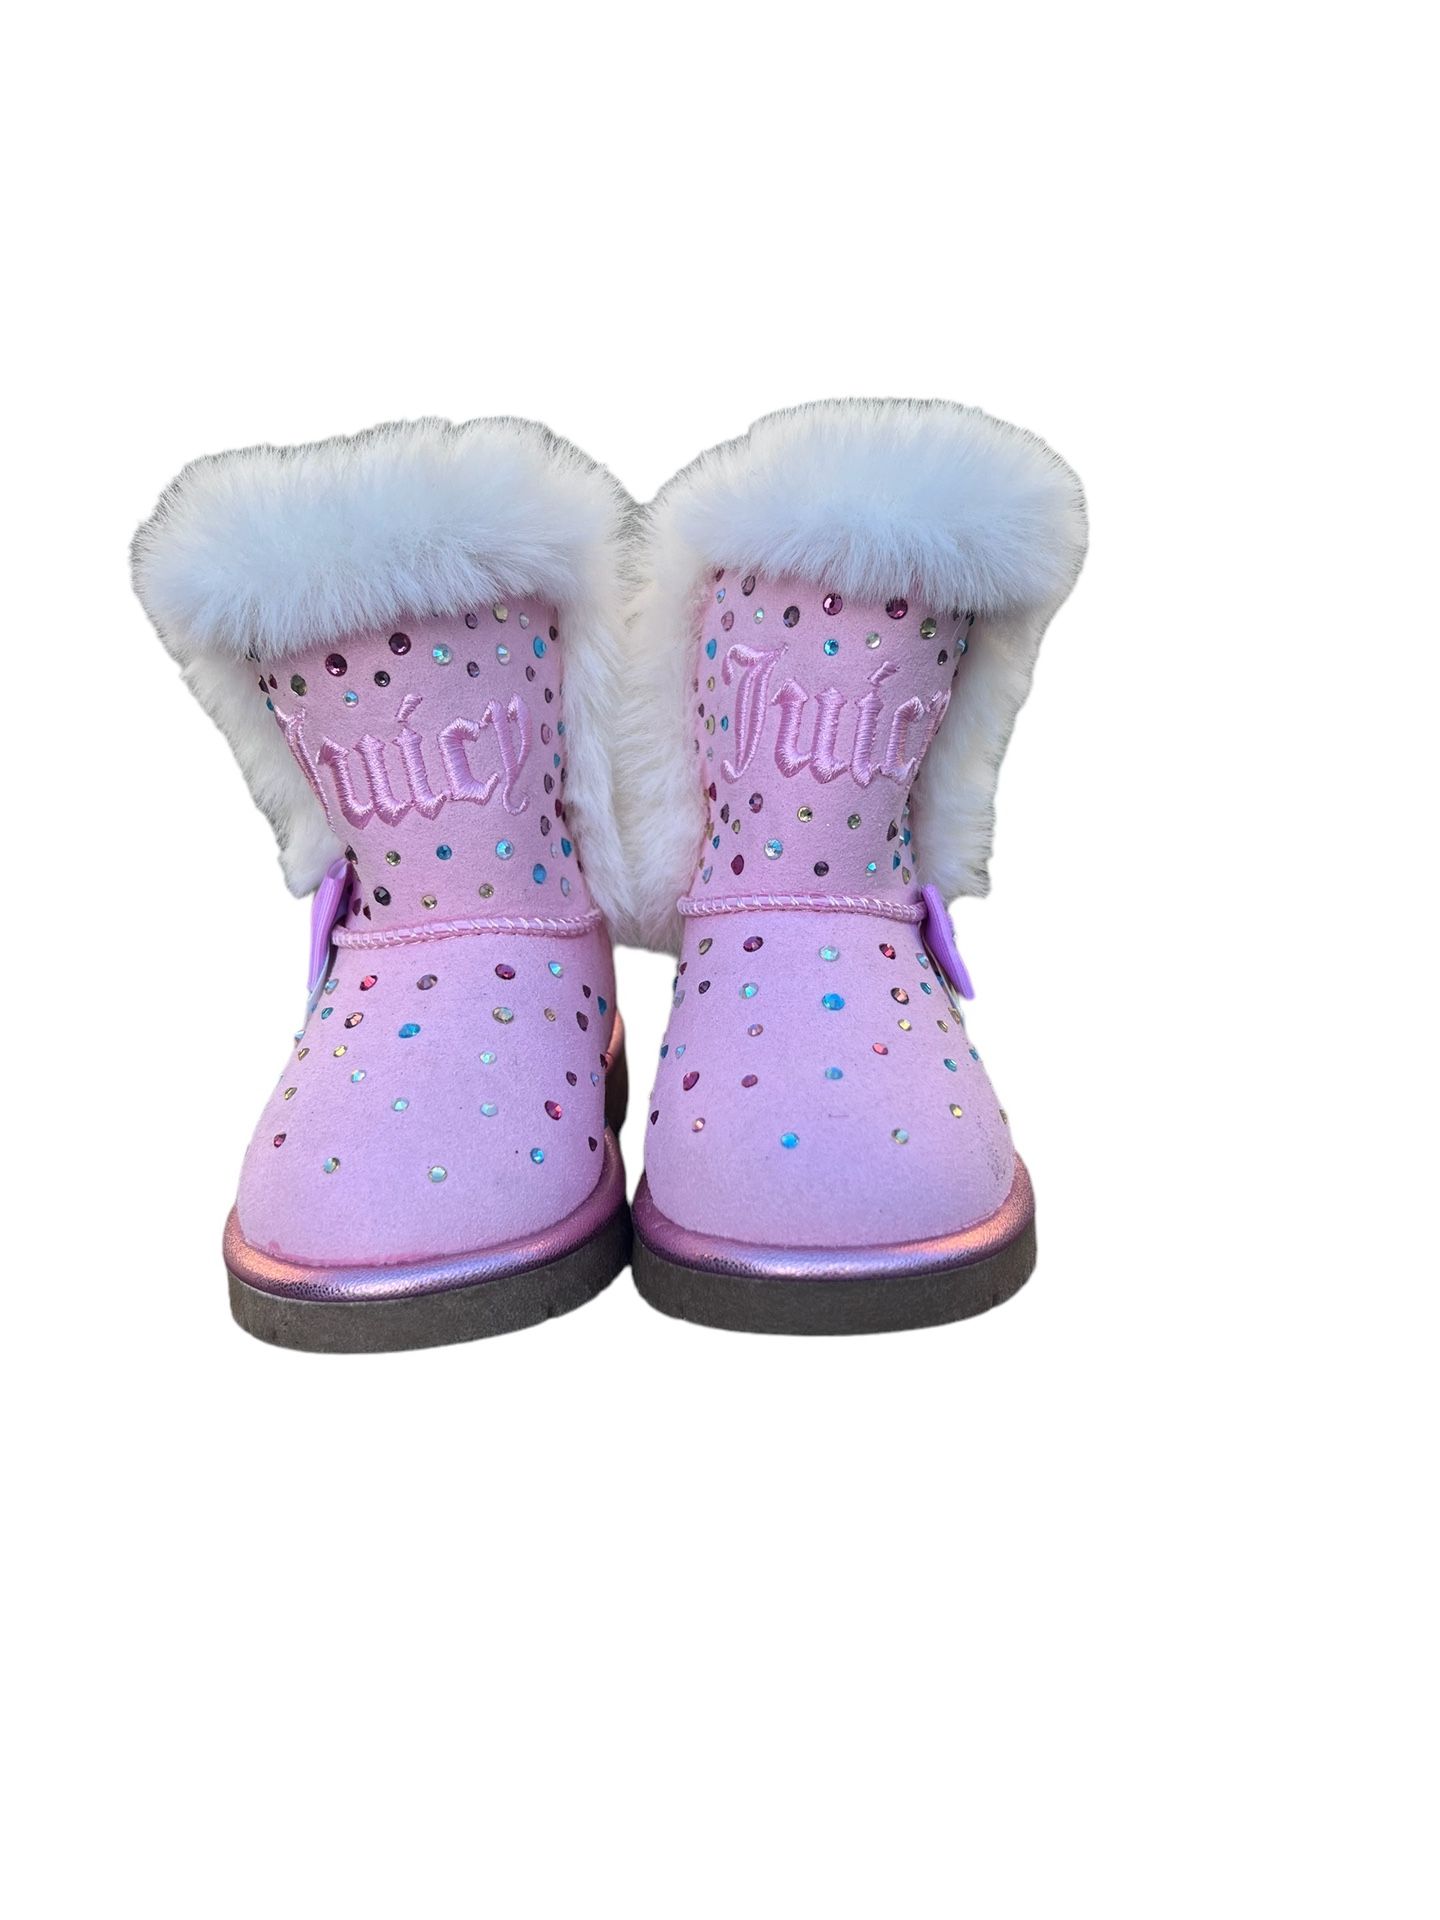 Toddler Juicy Couture Girls Pink Rhinestone Burbank Fur Ankle Winter Boots Size 6